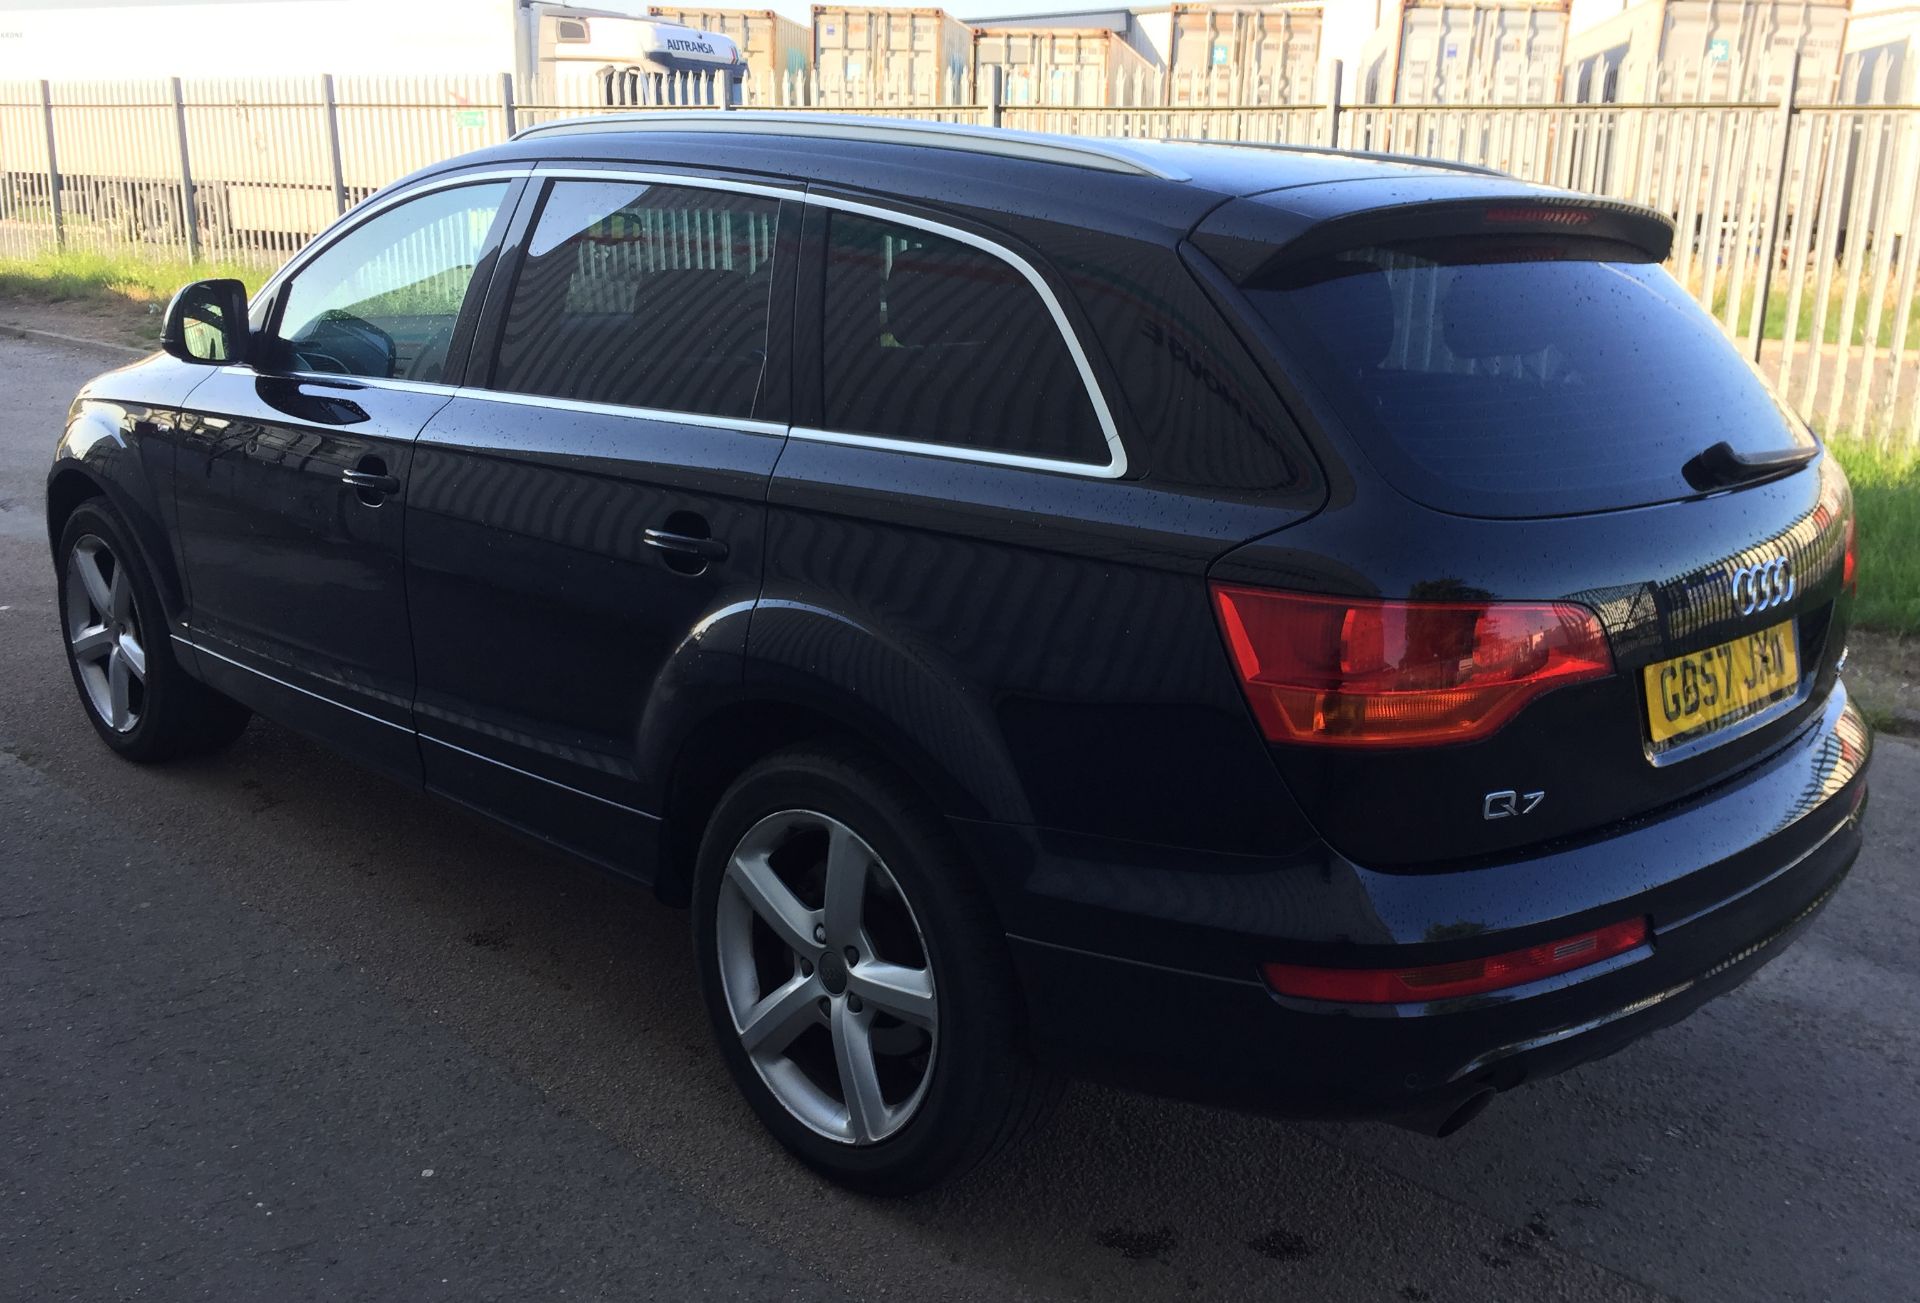 2008 Audi Q7 S Line 3.0 Tdi Quattro 5Dr 4x4 - CL505 - NO VAT ON THE HAMMER - Location: Corby, Northa - Image 6 of 17